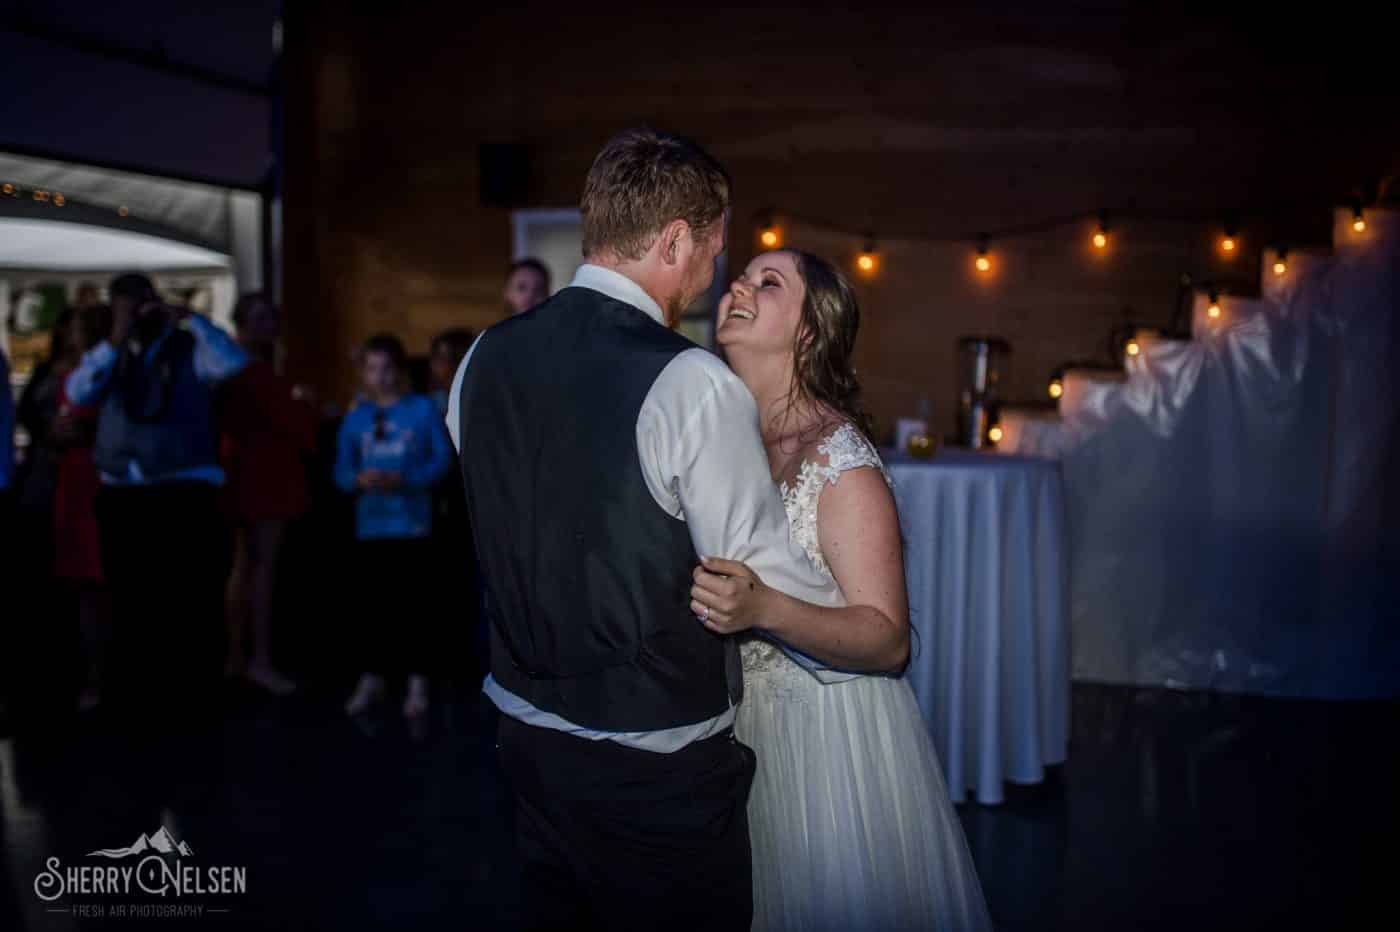 Shane and Shelby at their first dance at their Sunshine Coast wedding